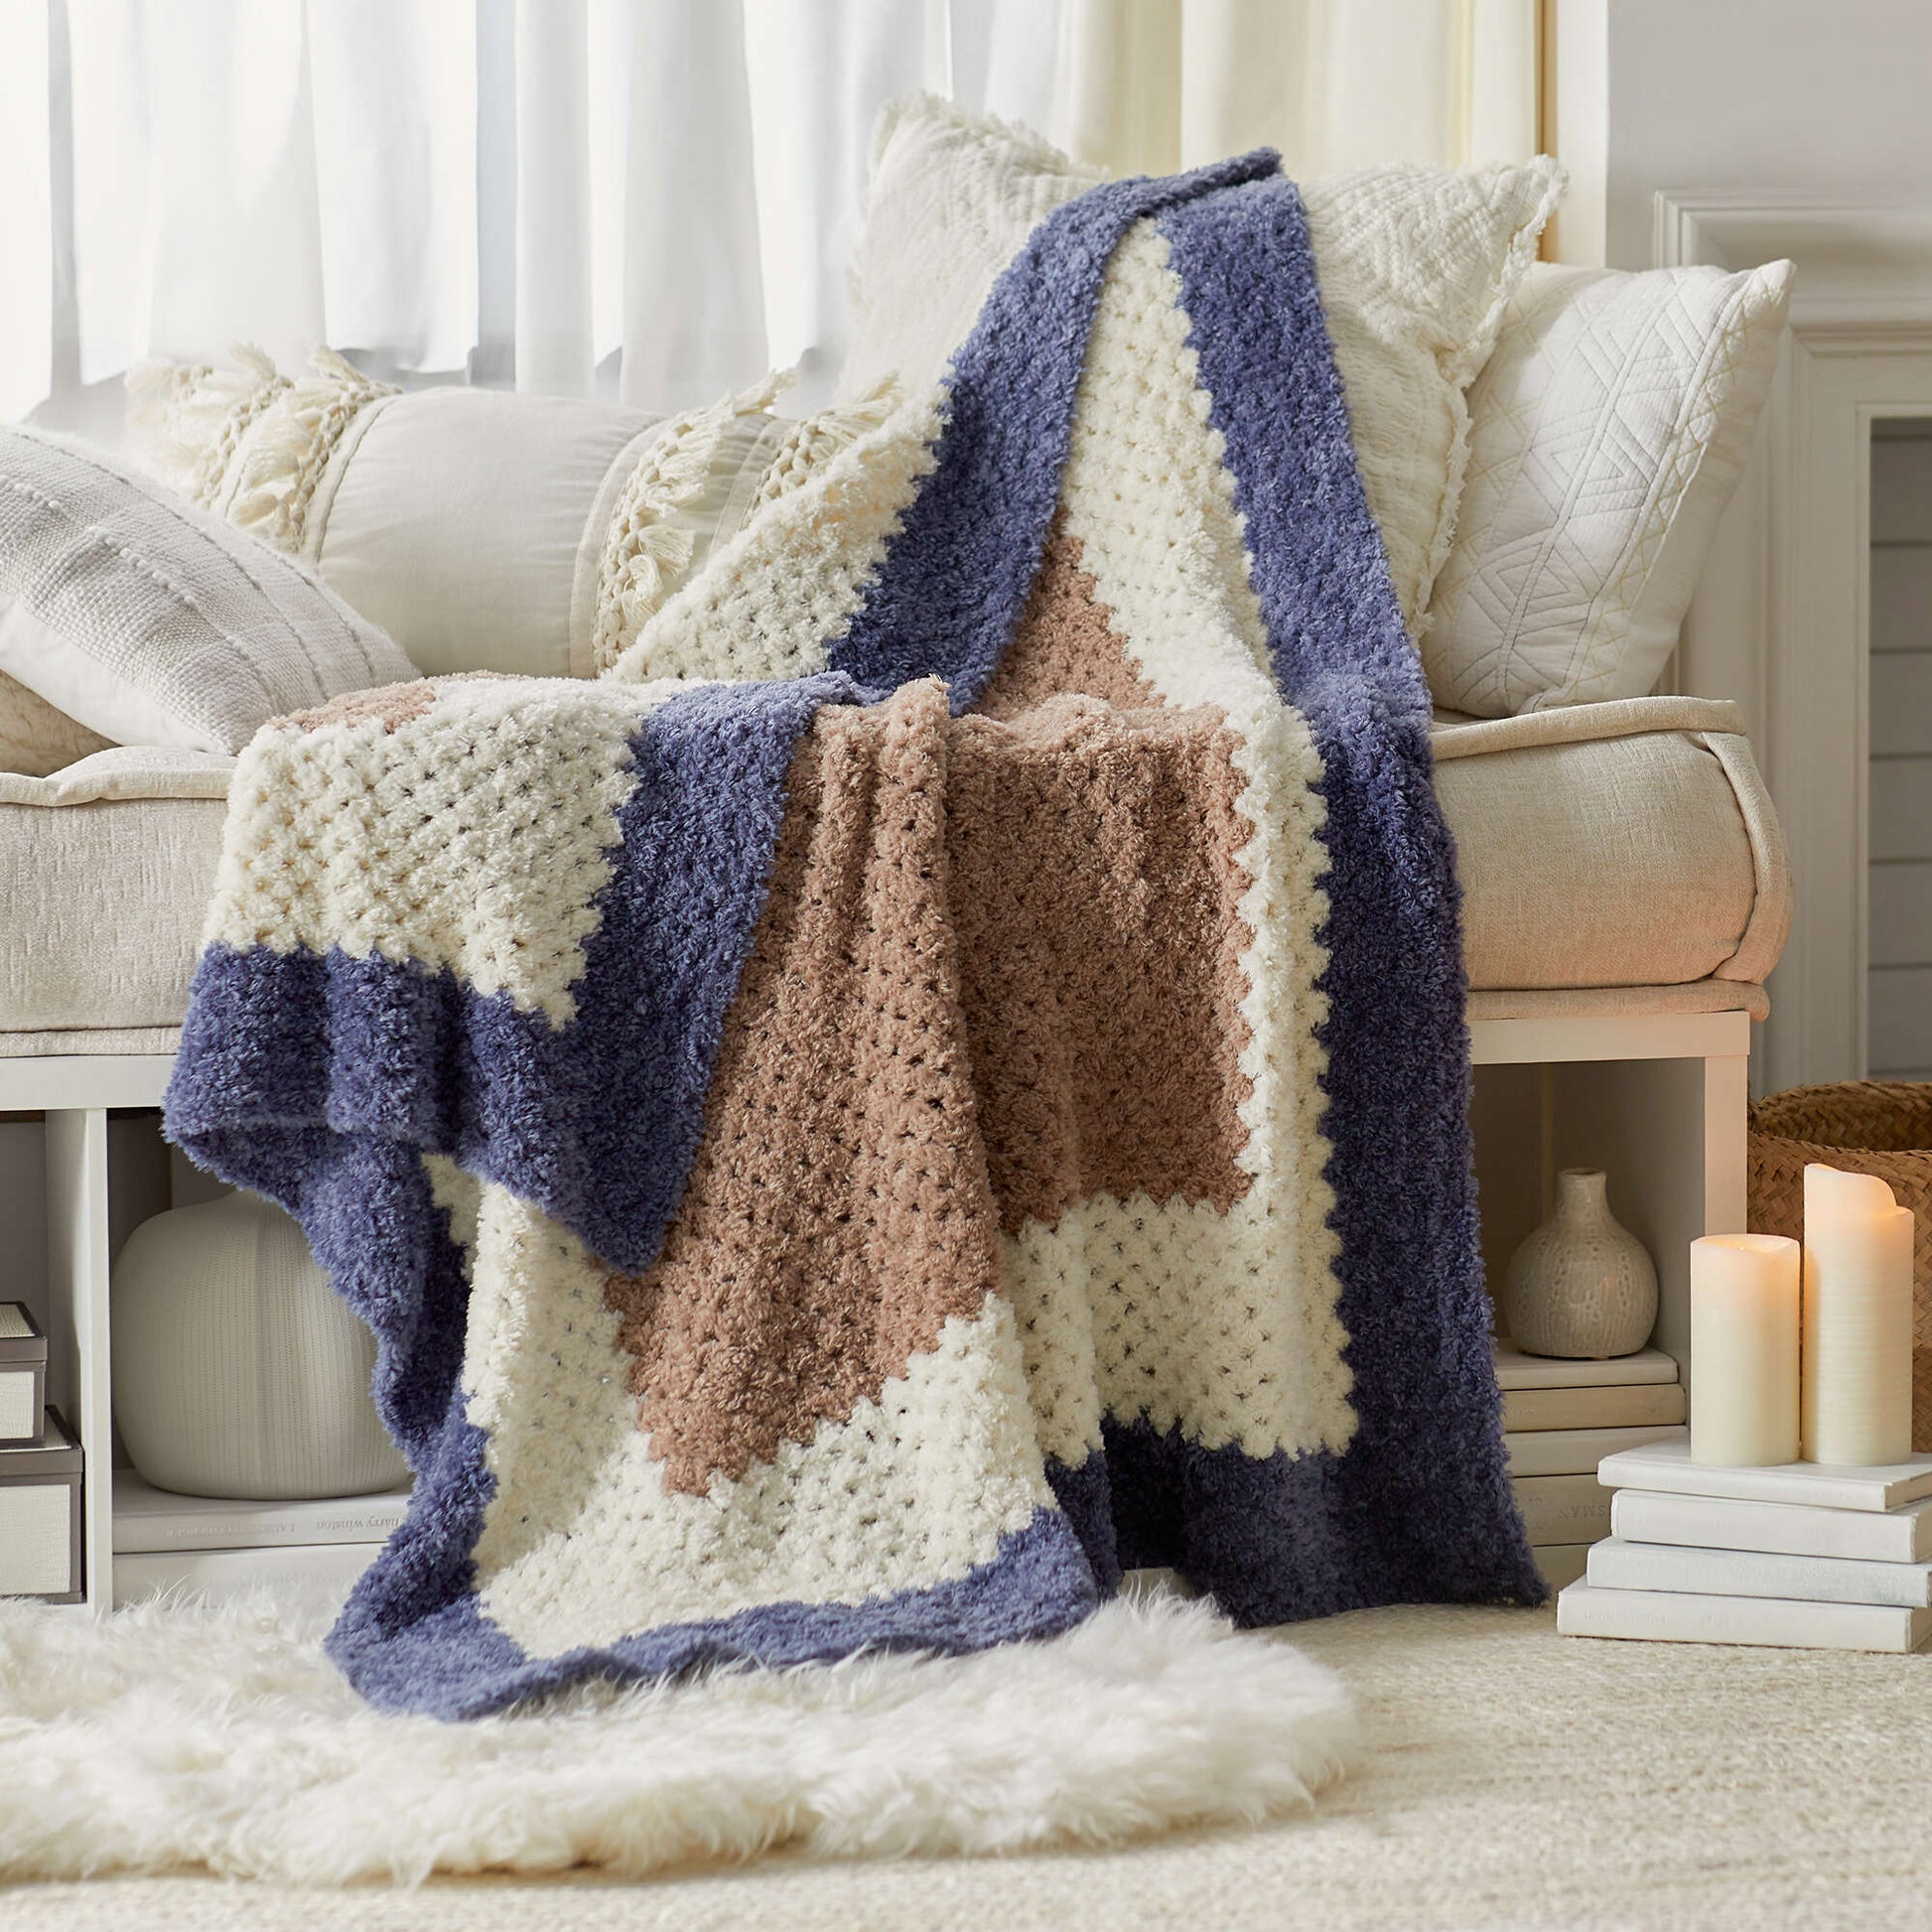 Free Red Heart Crochet Hygge At Home Throw Pattern